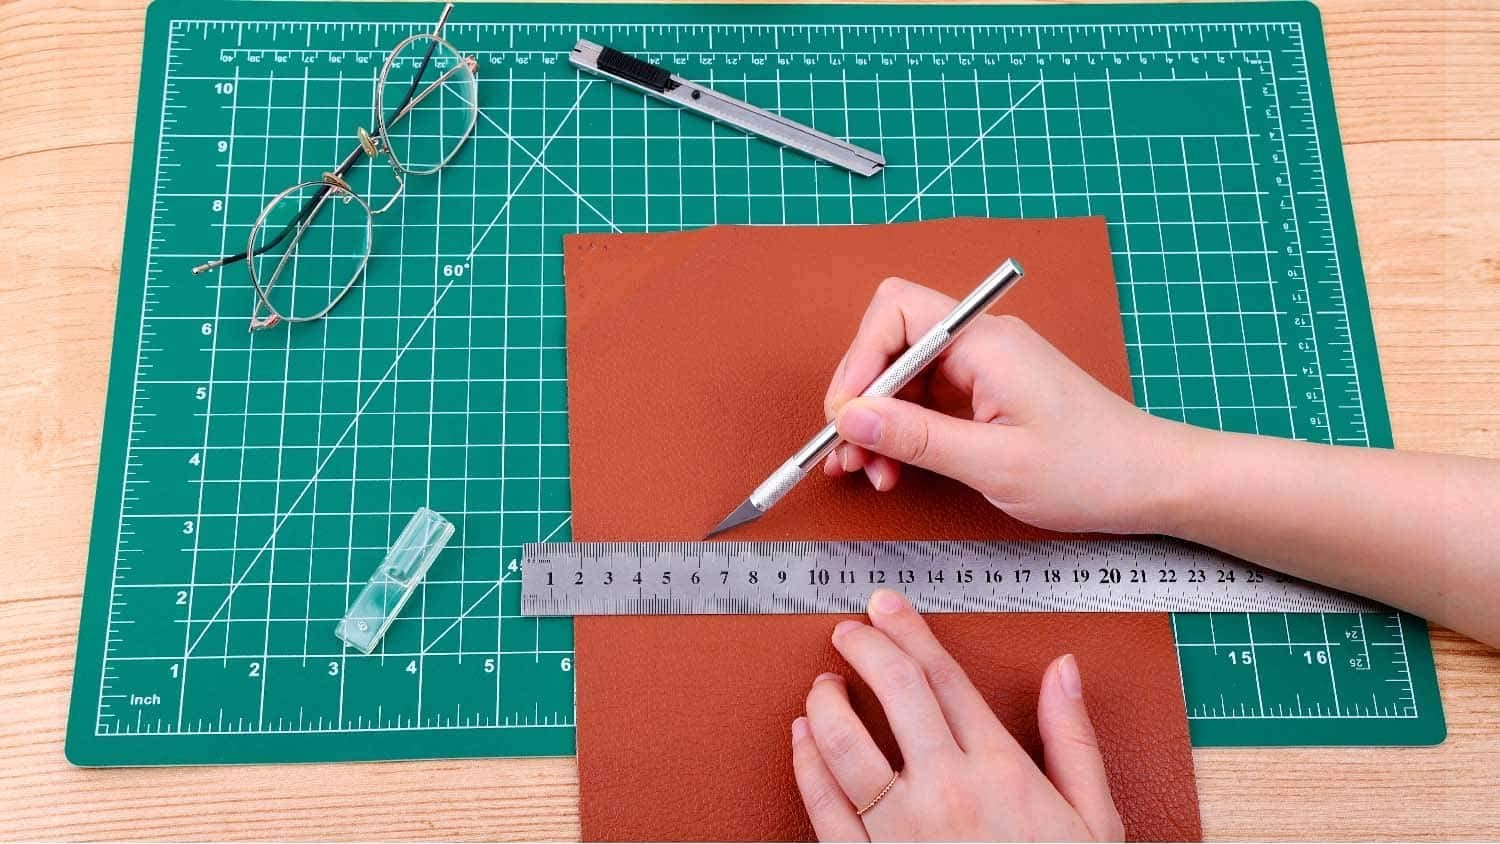 The best cutting mat in 2023 trimming photos, scrapbooking and | Digital Camera World